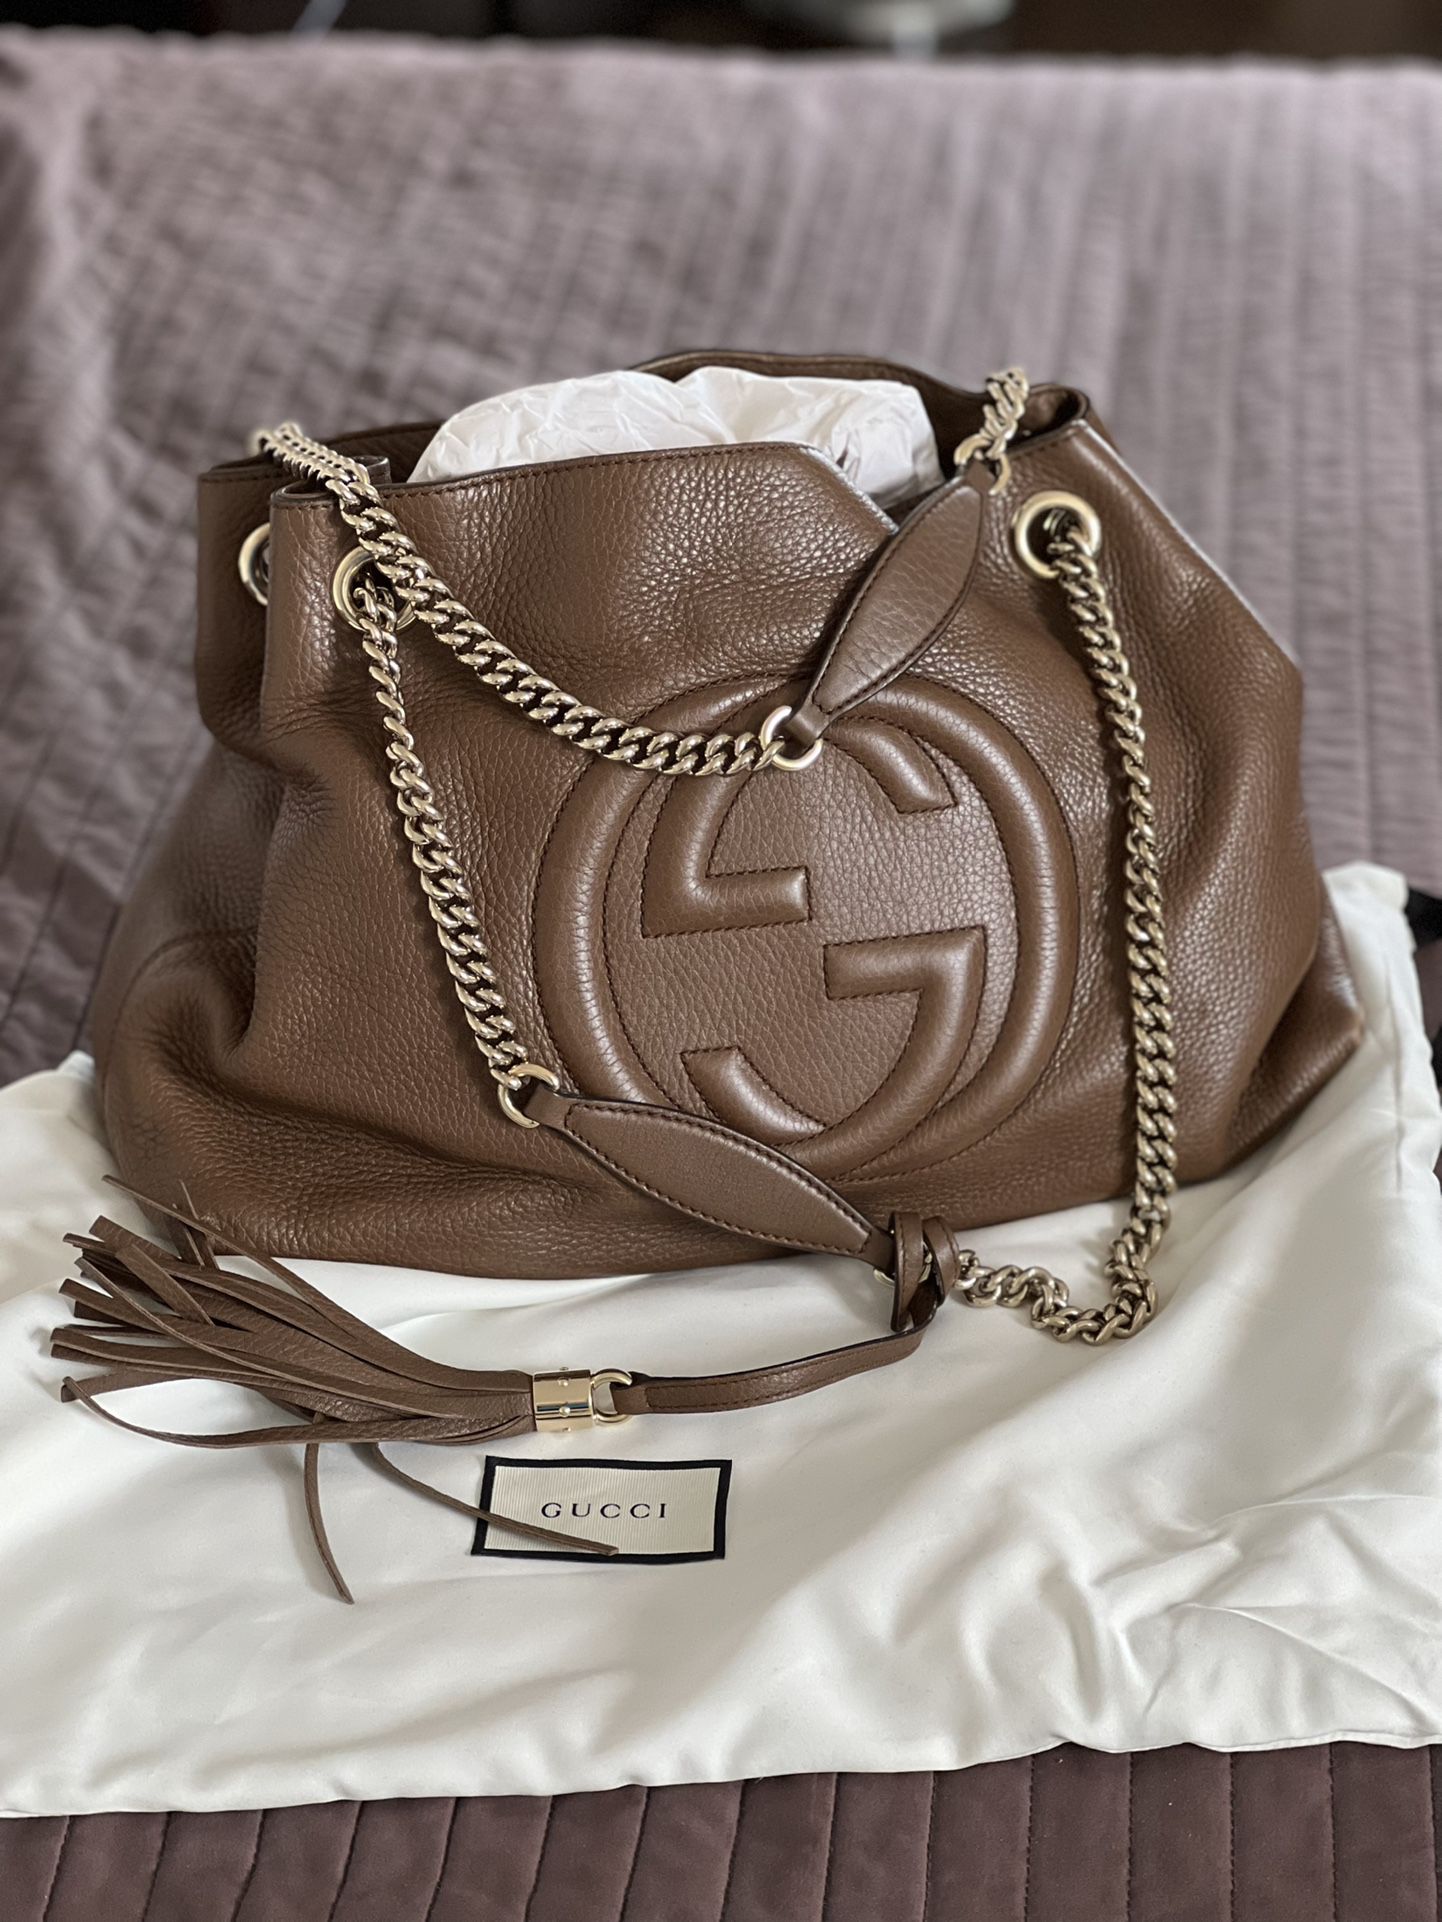 Gucci Brown Pebbled Leather Medium Soho Chain Tote